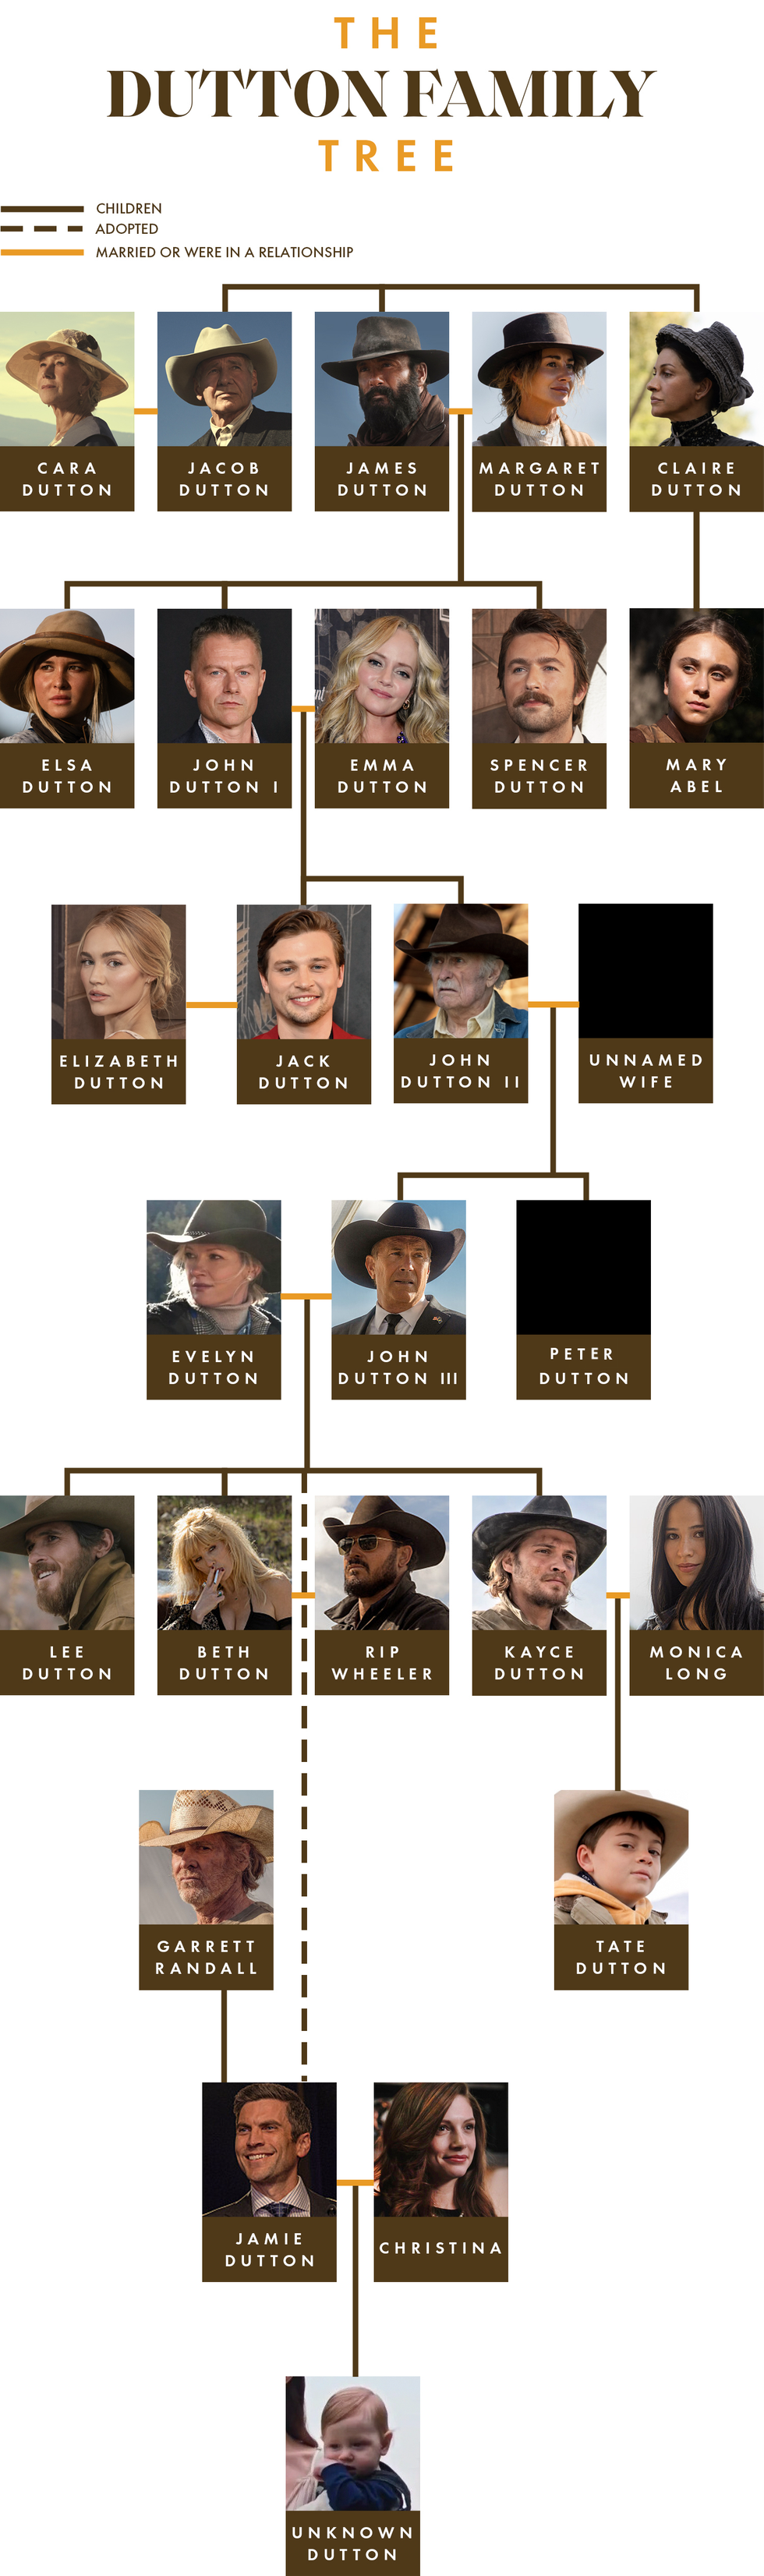 breaking-down-the-dutton-family-tree-of-yellowstone-1923-and-1883-hollywood411-news